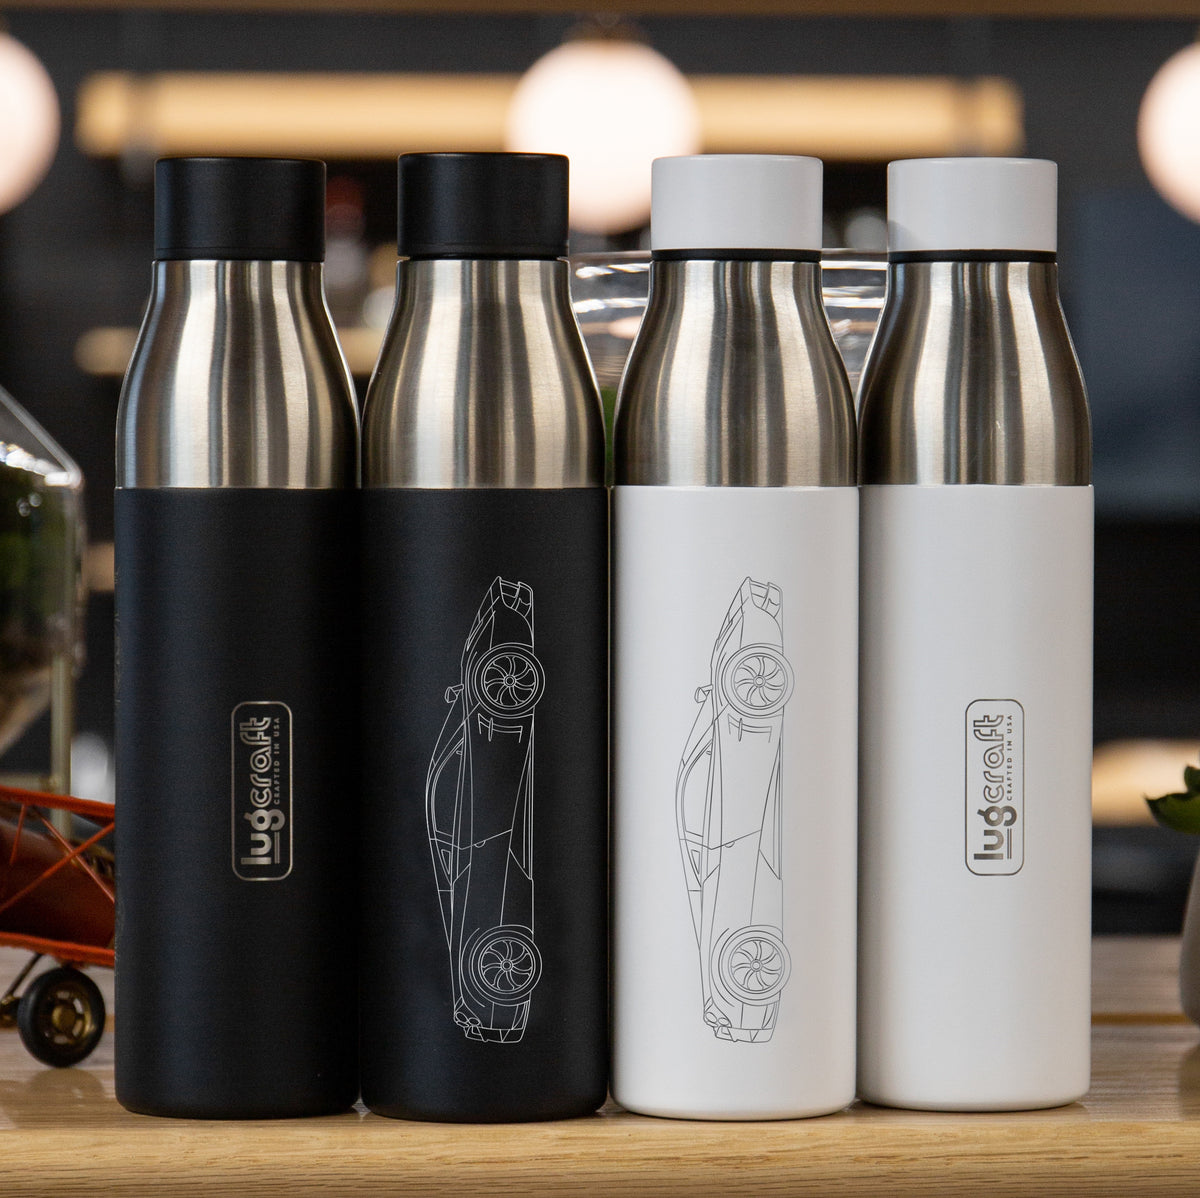 Pagani Huayra Insulated Stainless Steel Water Bottle - 21 oz